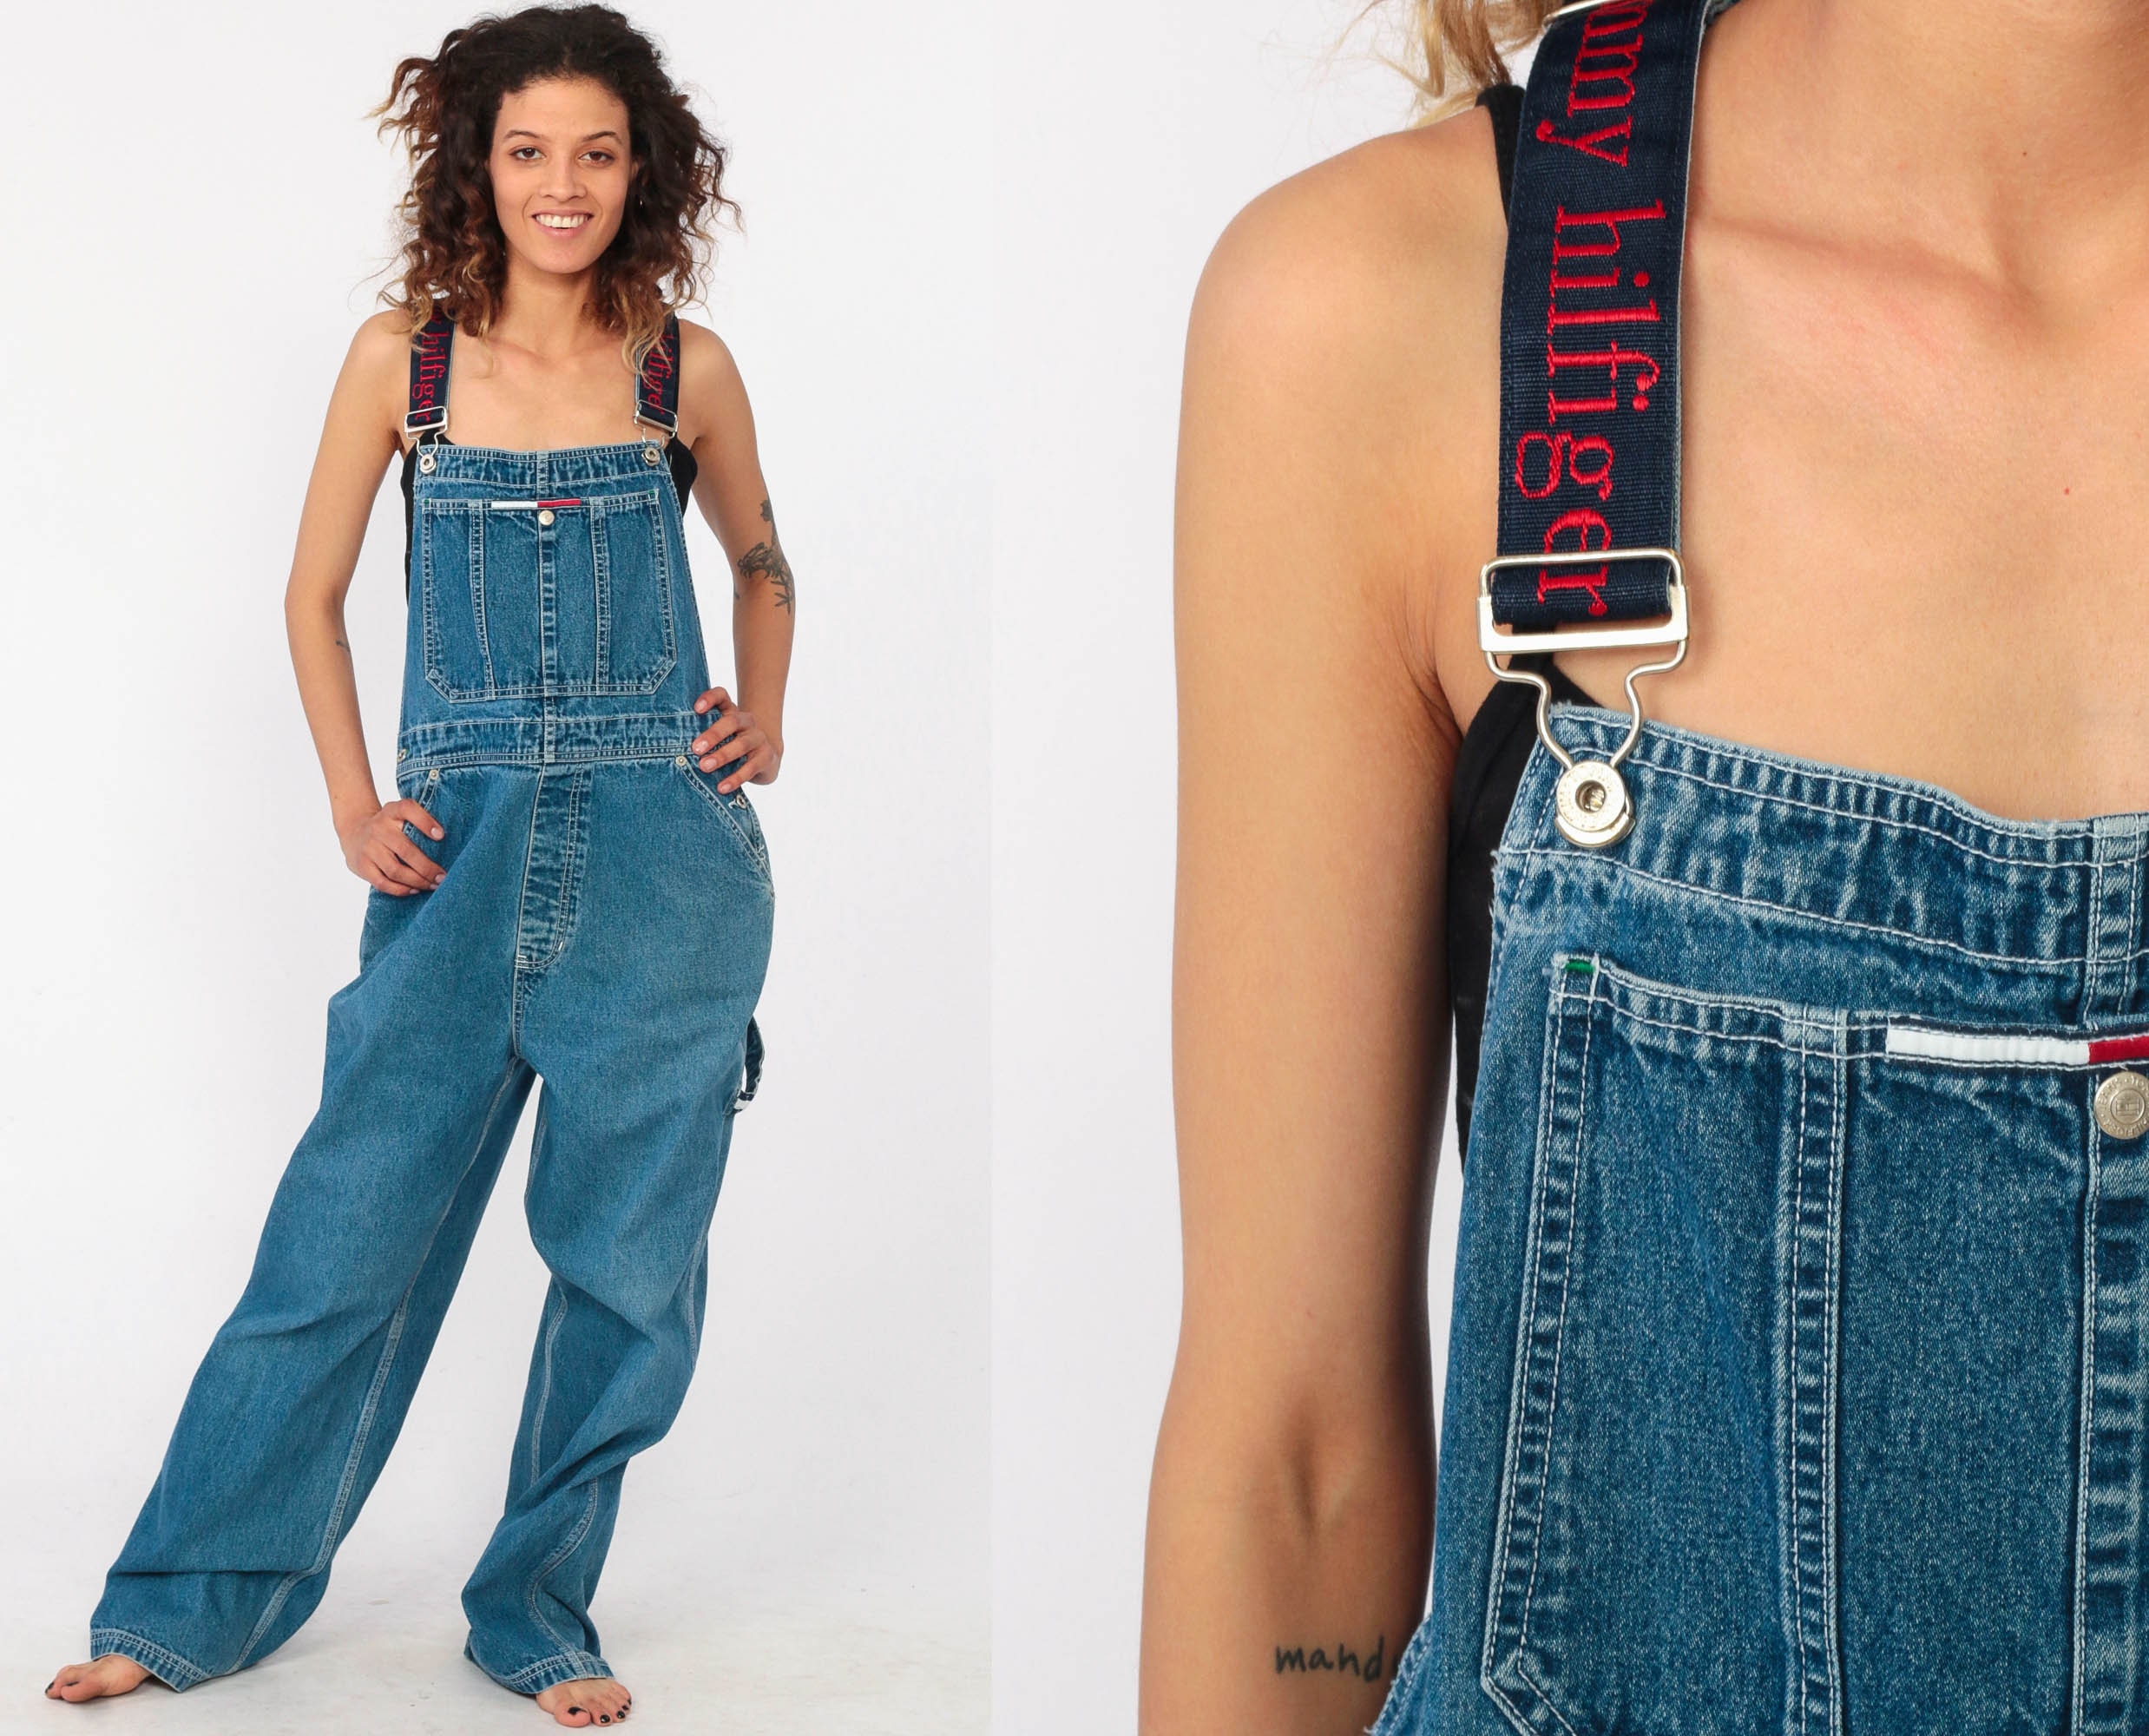 Uberettiget weekend Scan Tommy Hilfiger Overalls Pants 90s Streetwear Denim SPELLOUT Pants Bib Baggy  Spell Out Long Jean Pants 1990s Hipster Vintage Dungarees Medium